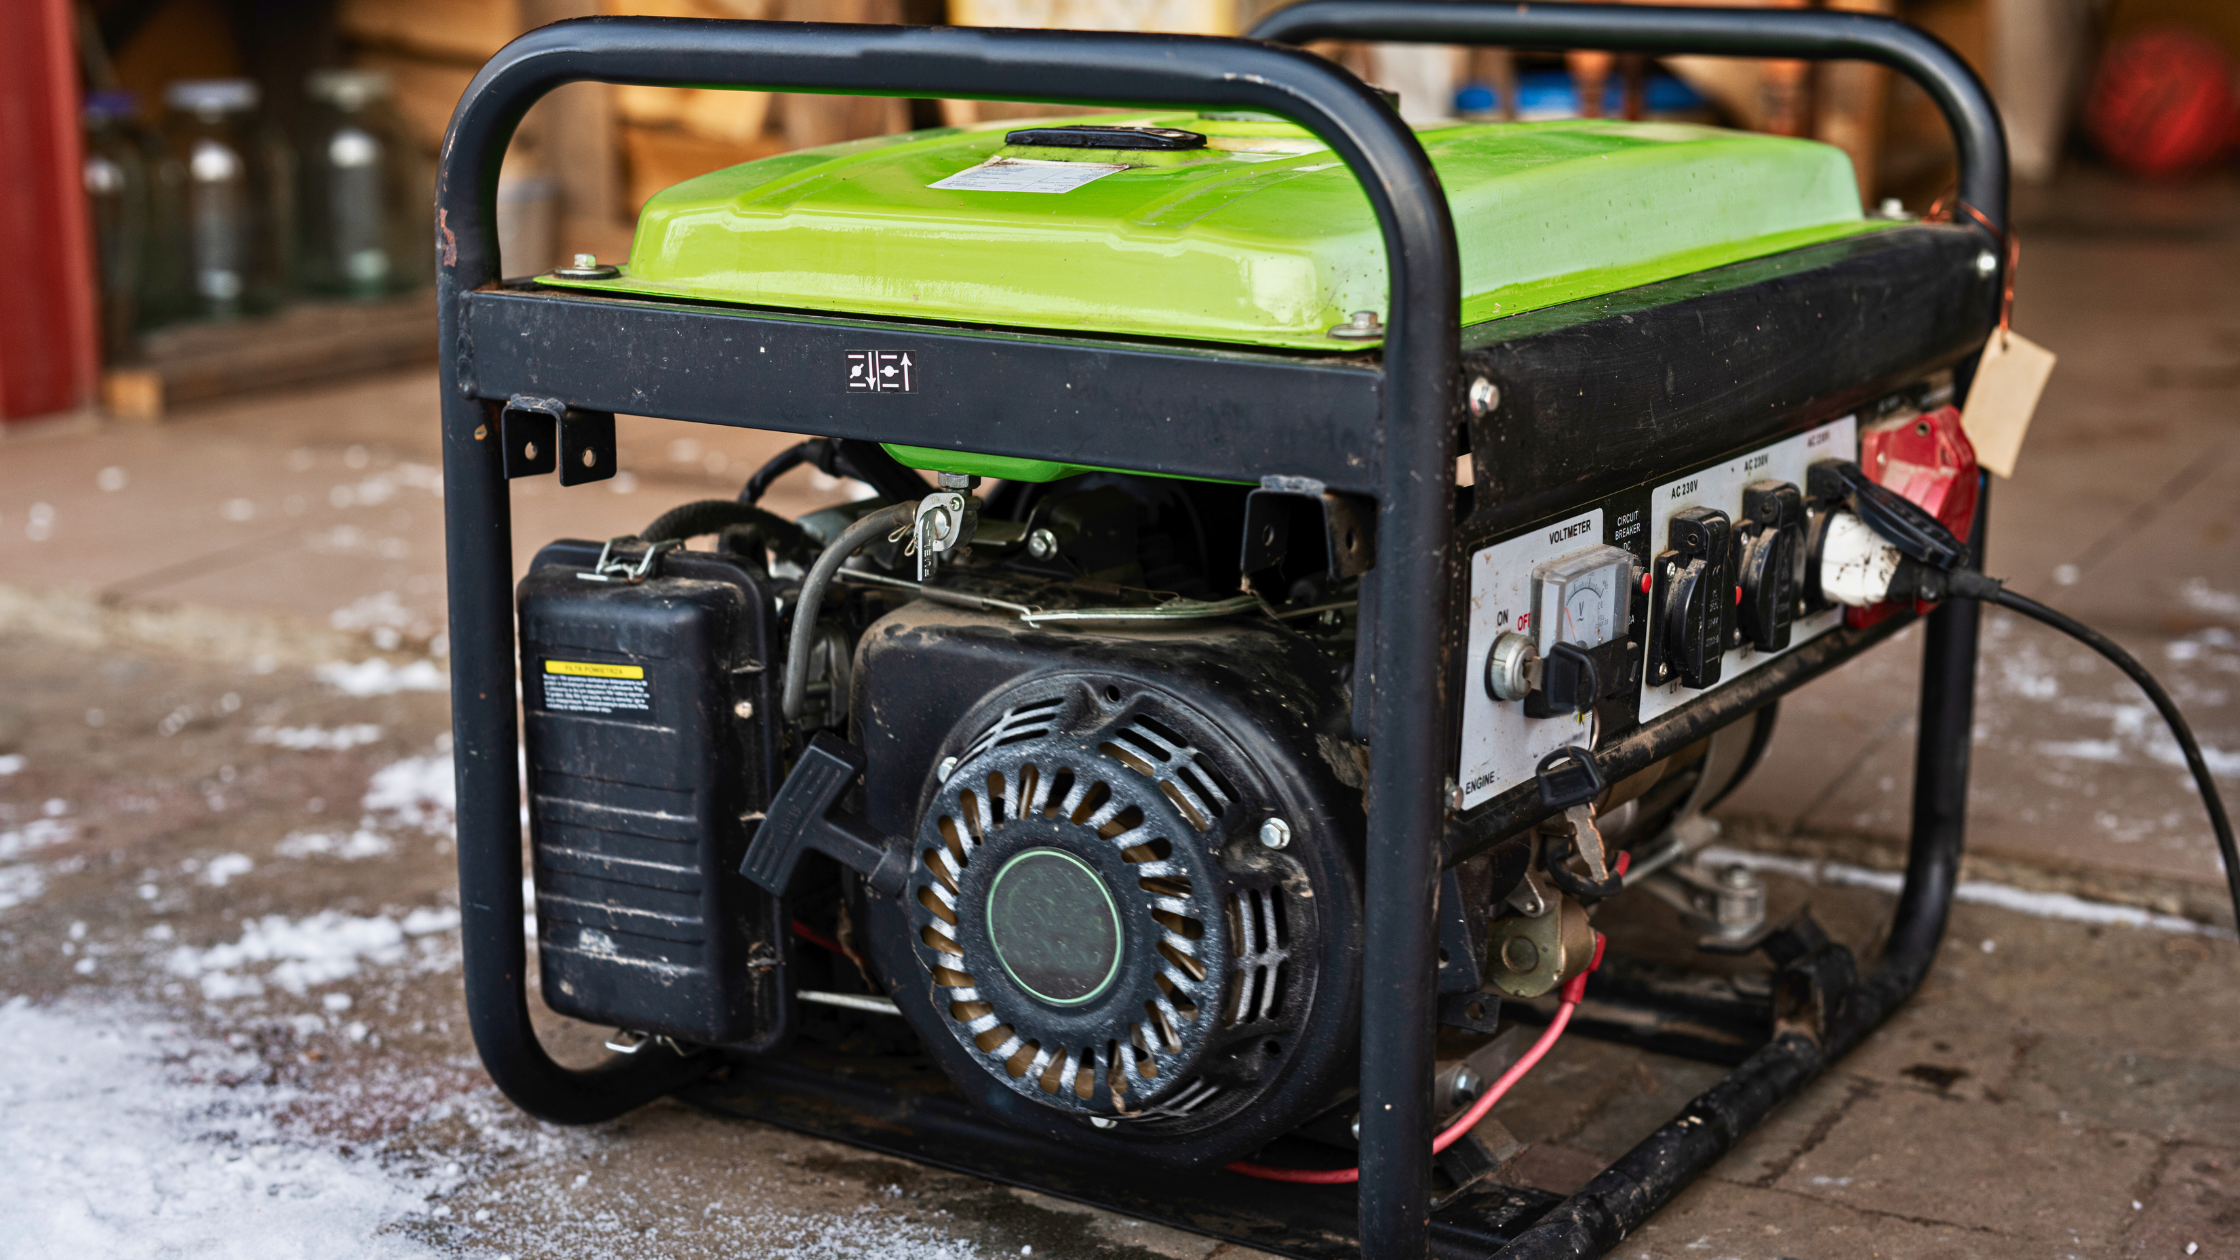 Does a Generator Use More Gas If You Use More Electricity? | Answered in this blog post by Beattie Dukelow Electrical